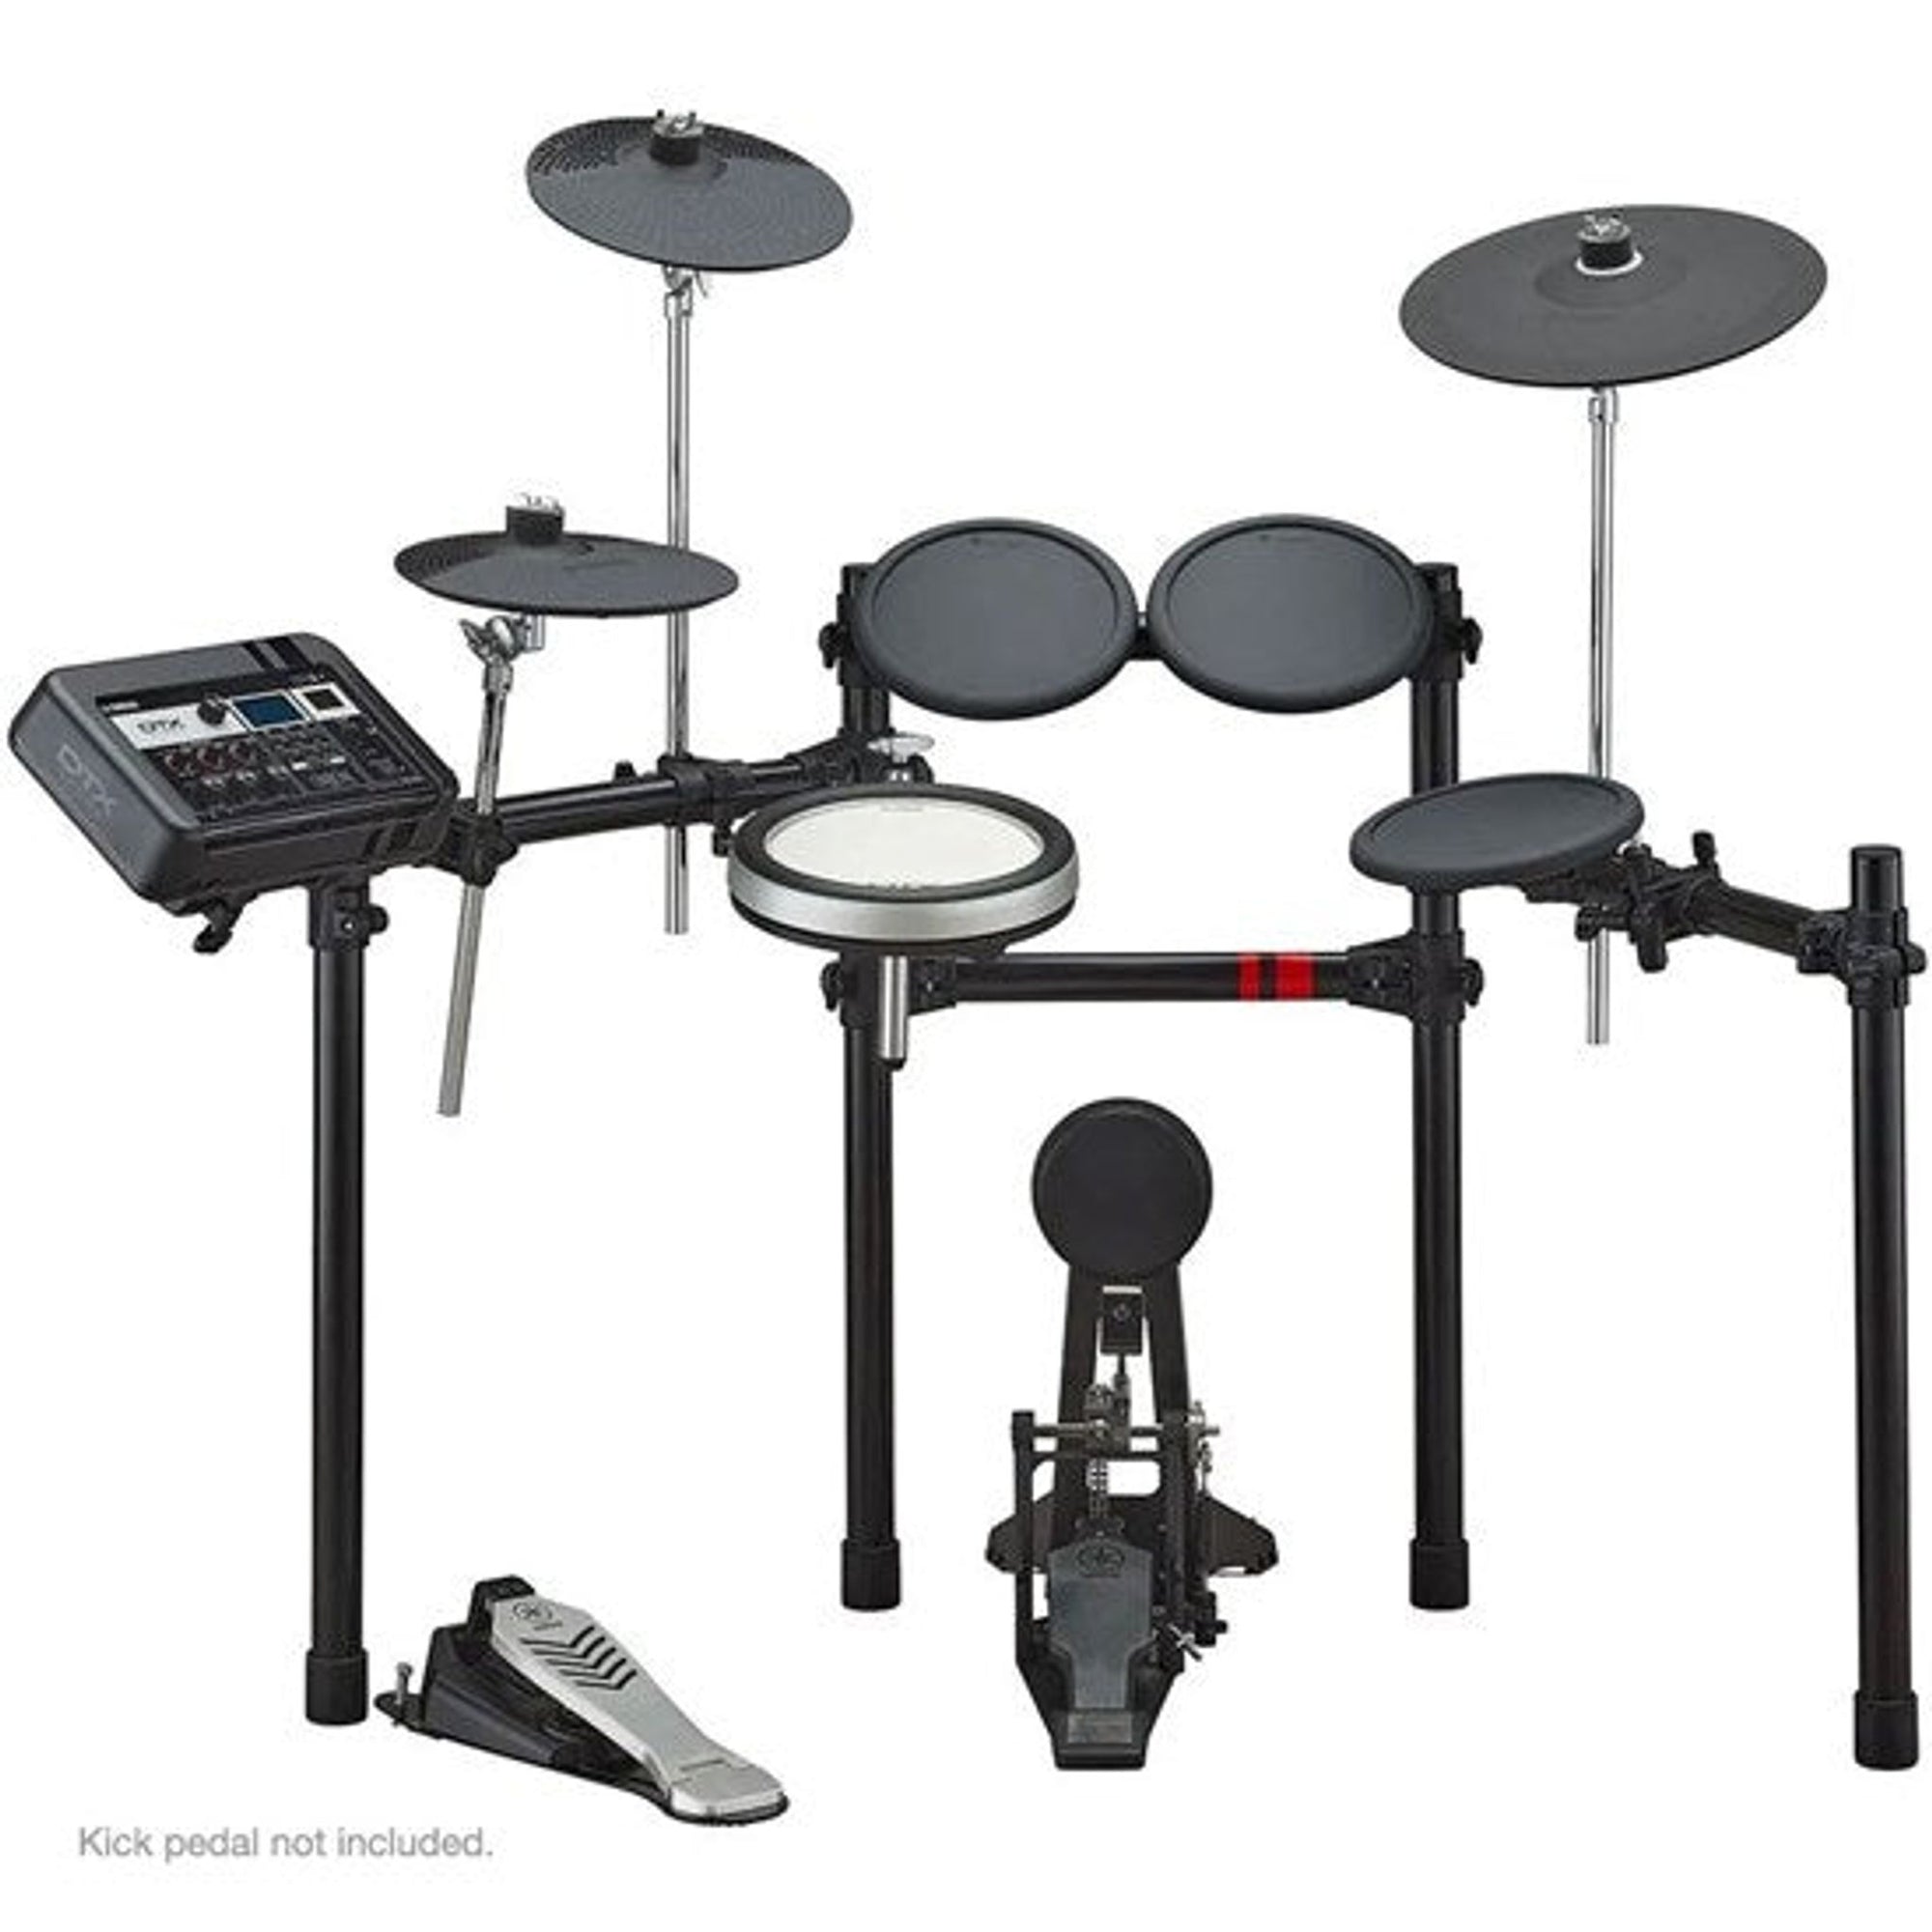 The Yamaha DTX6K-X Electronic Drum Kit offers a powerful, engaging drumming experience with compact convenience, sparks creativity and delivers superb performance in a compact configuration.